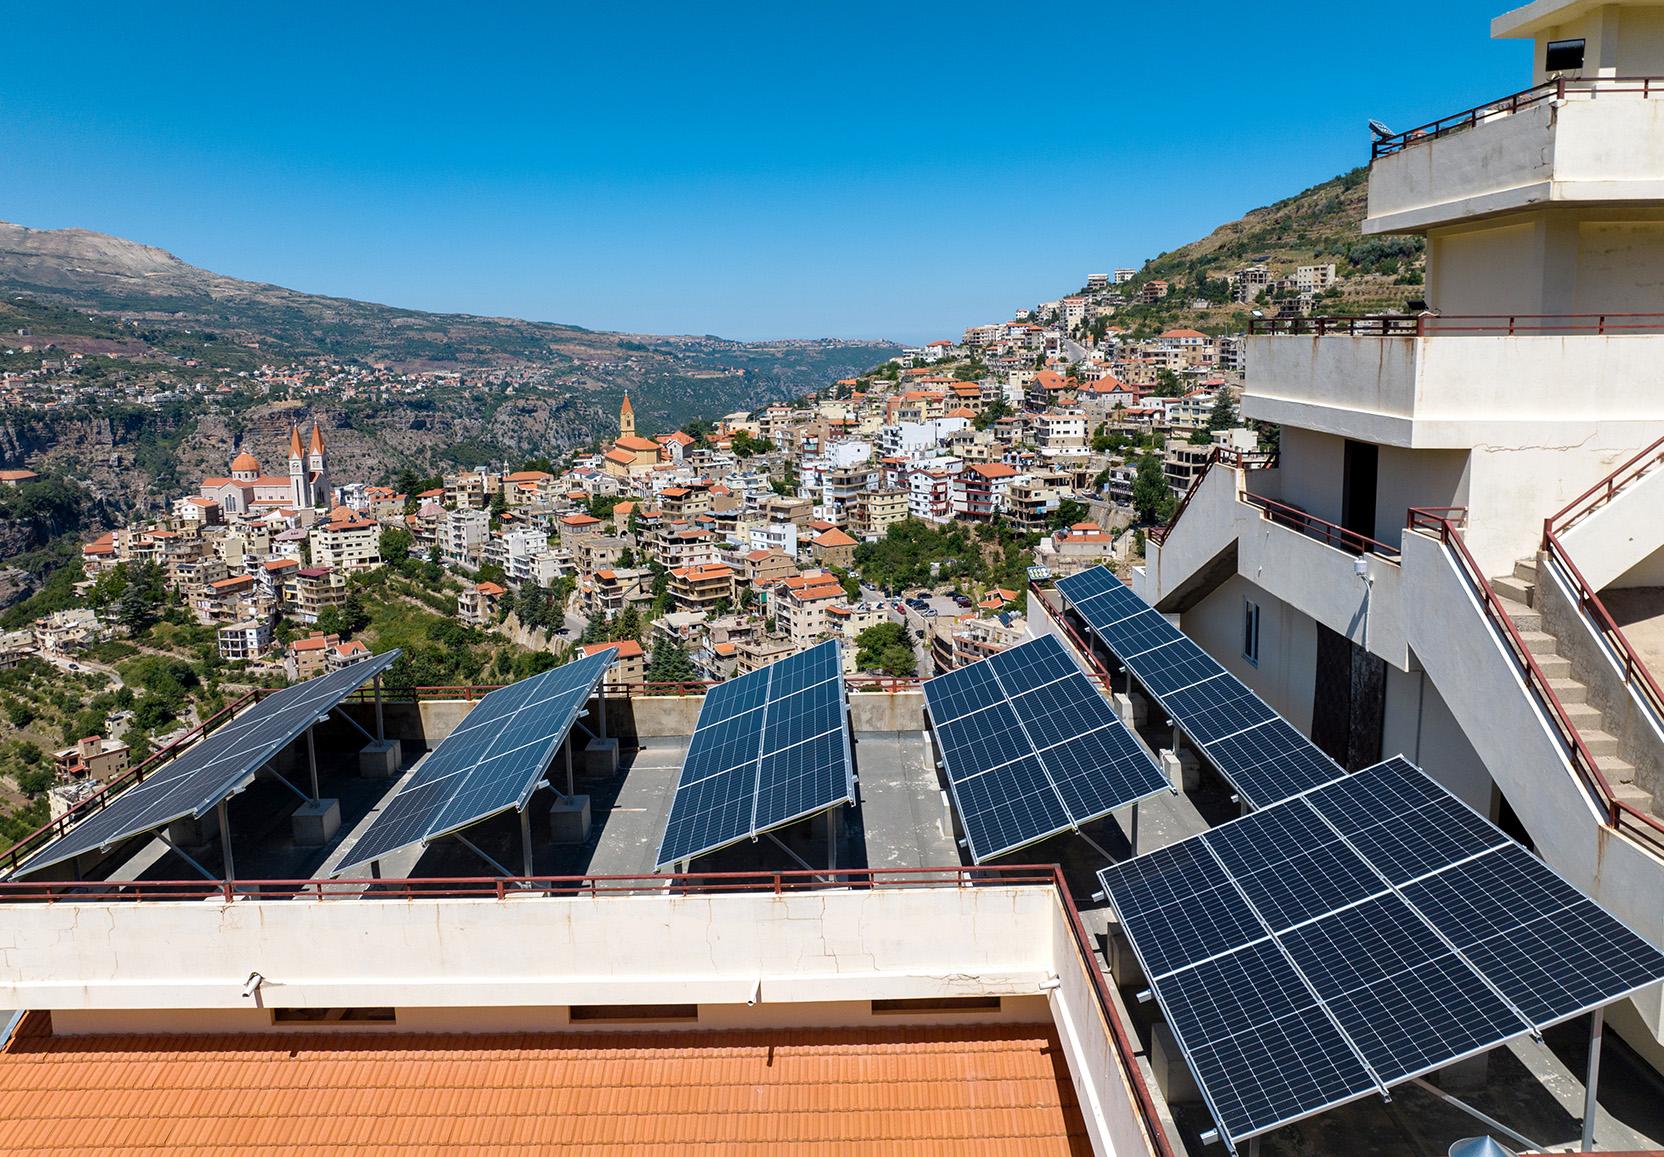 Solar photovoltaic systems on roofs in Lebanon. 